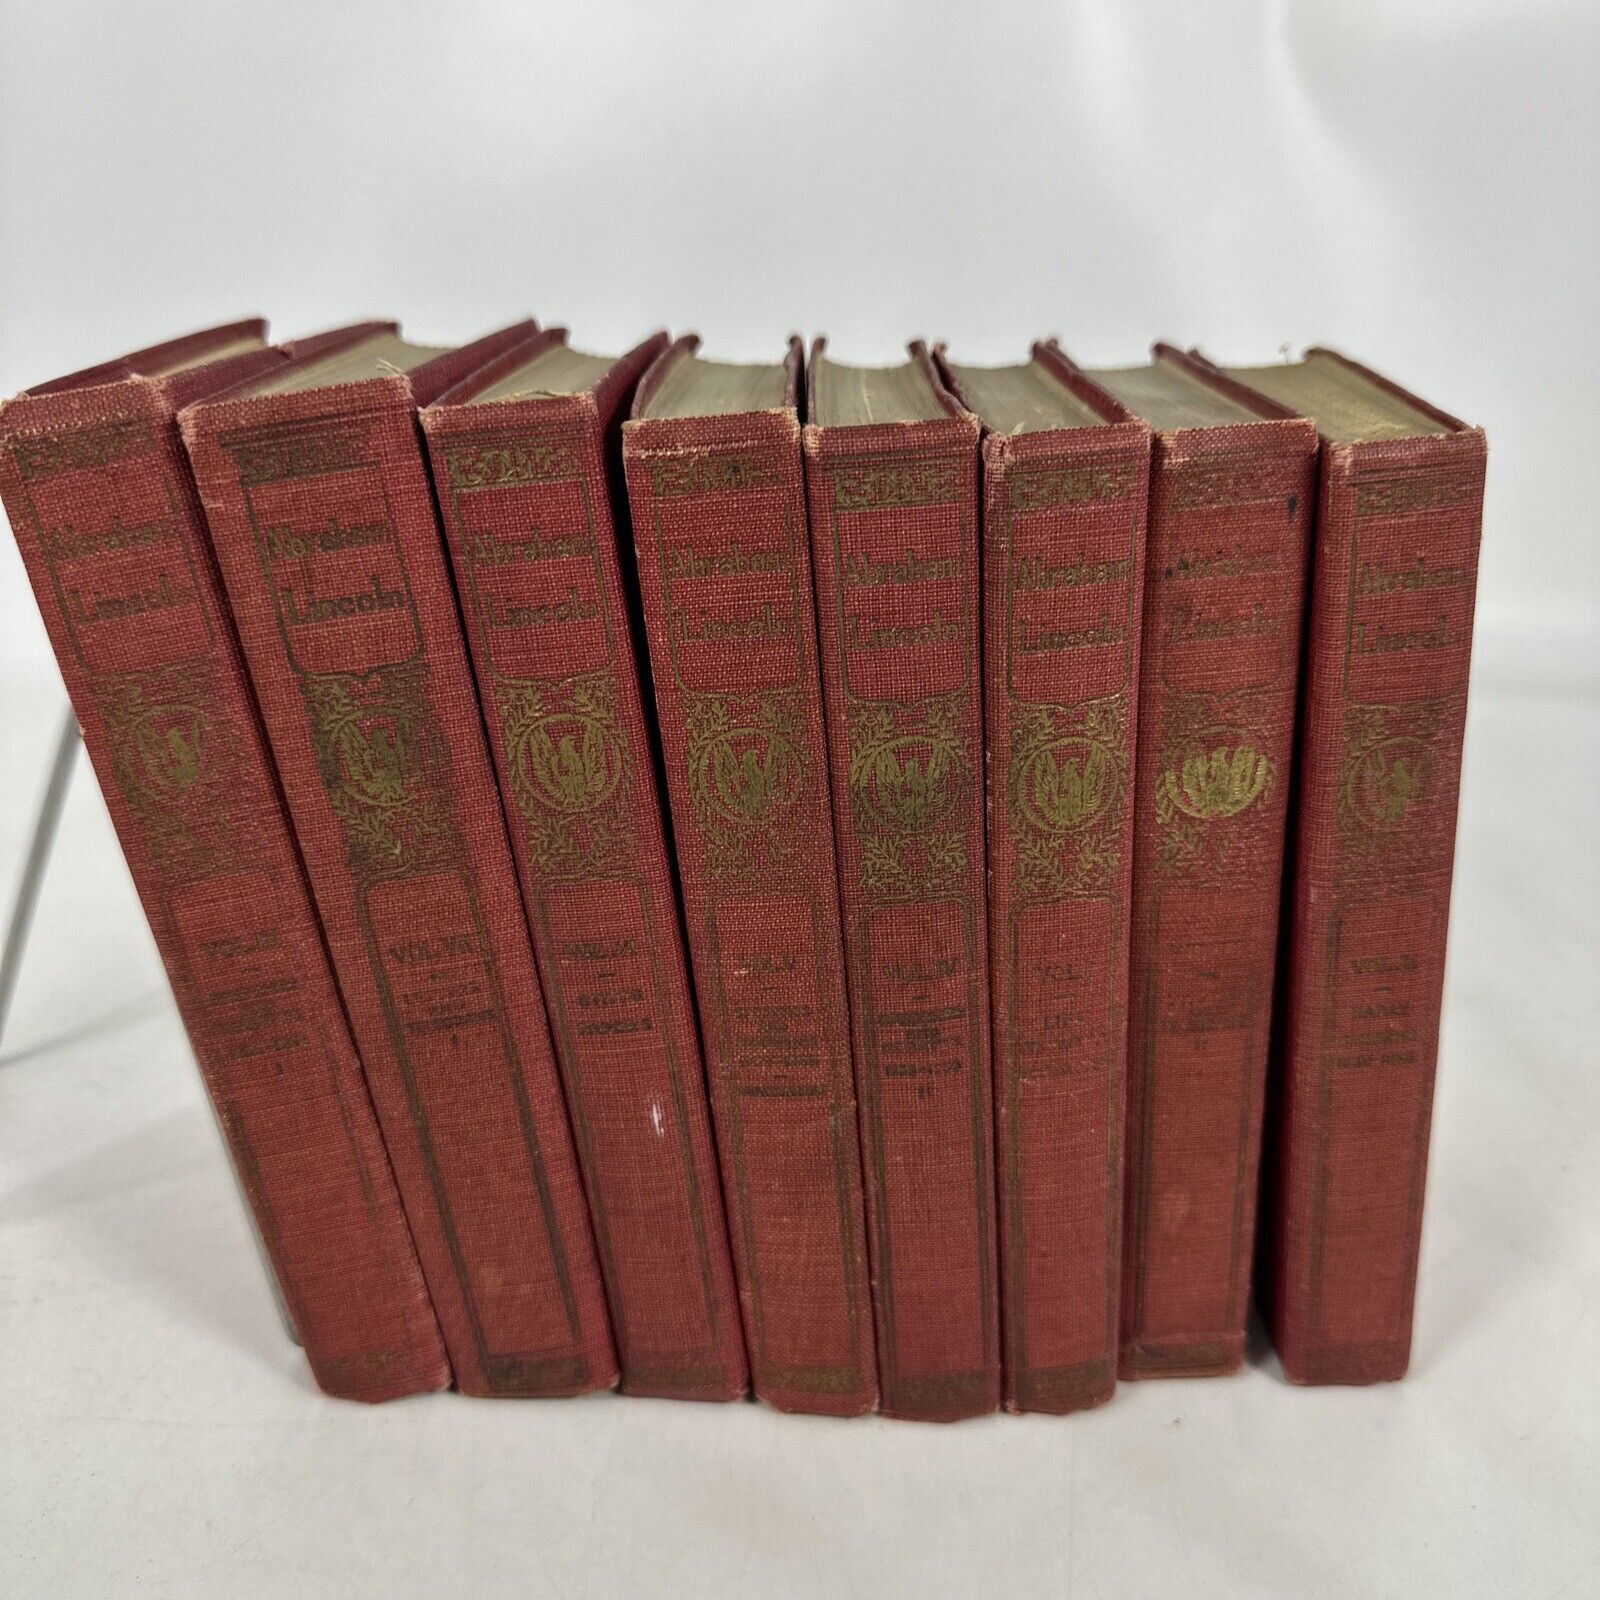 The Works Of Abraham Lincoln - 1908 - The University Society - 8 Books -94